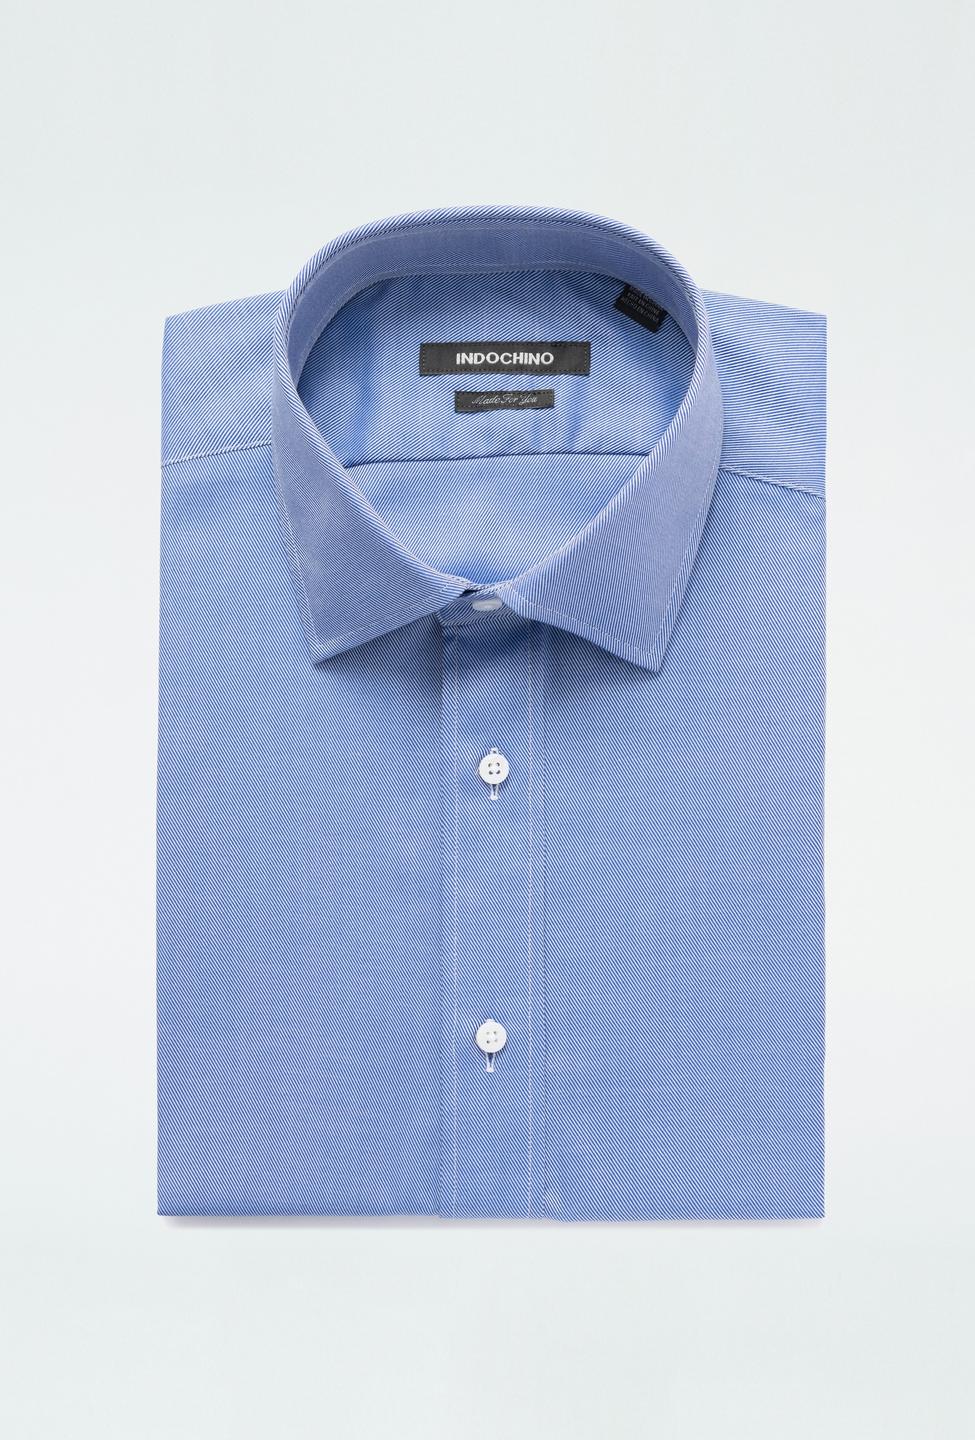 Blue shirt - Halewood Solid Design from Premium Indochino Collection